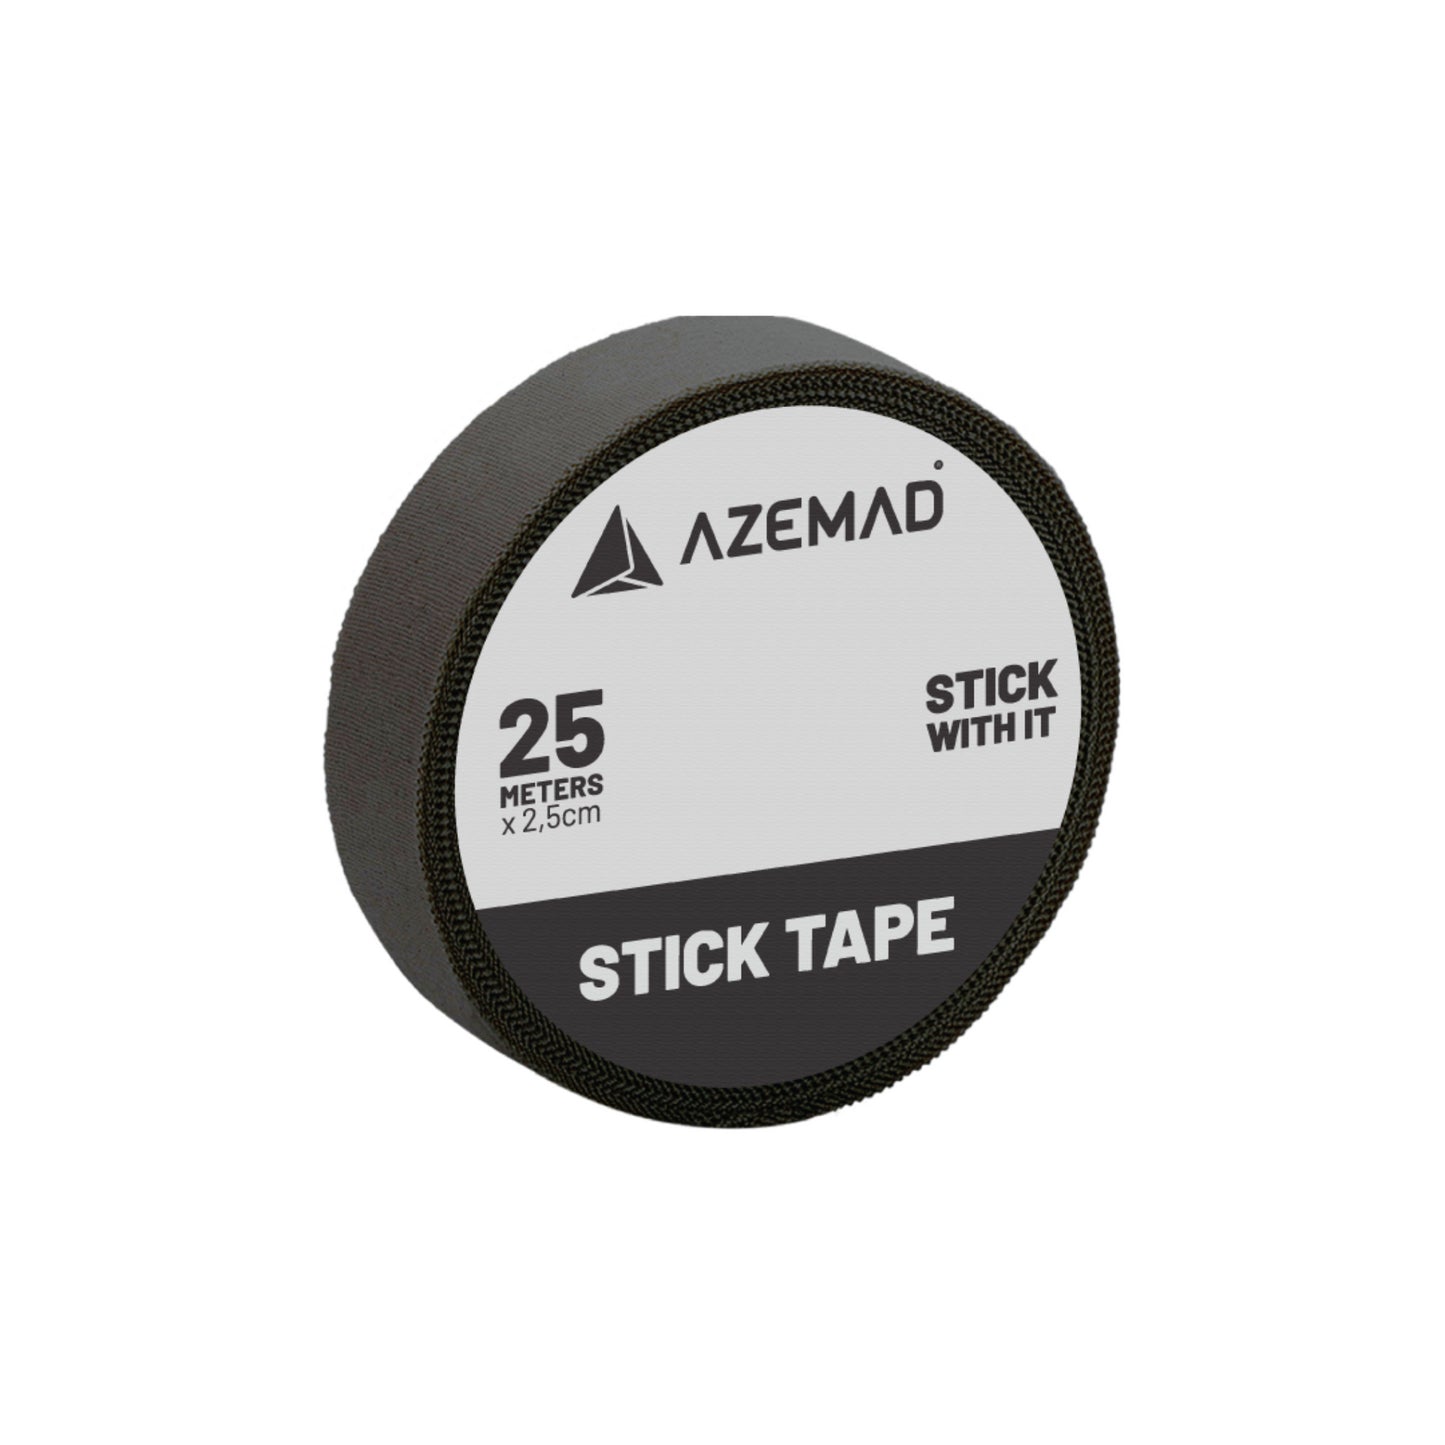 AZEMAD Tape for Sticks (25m)